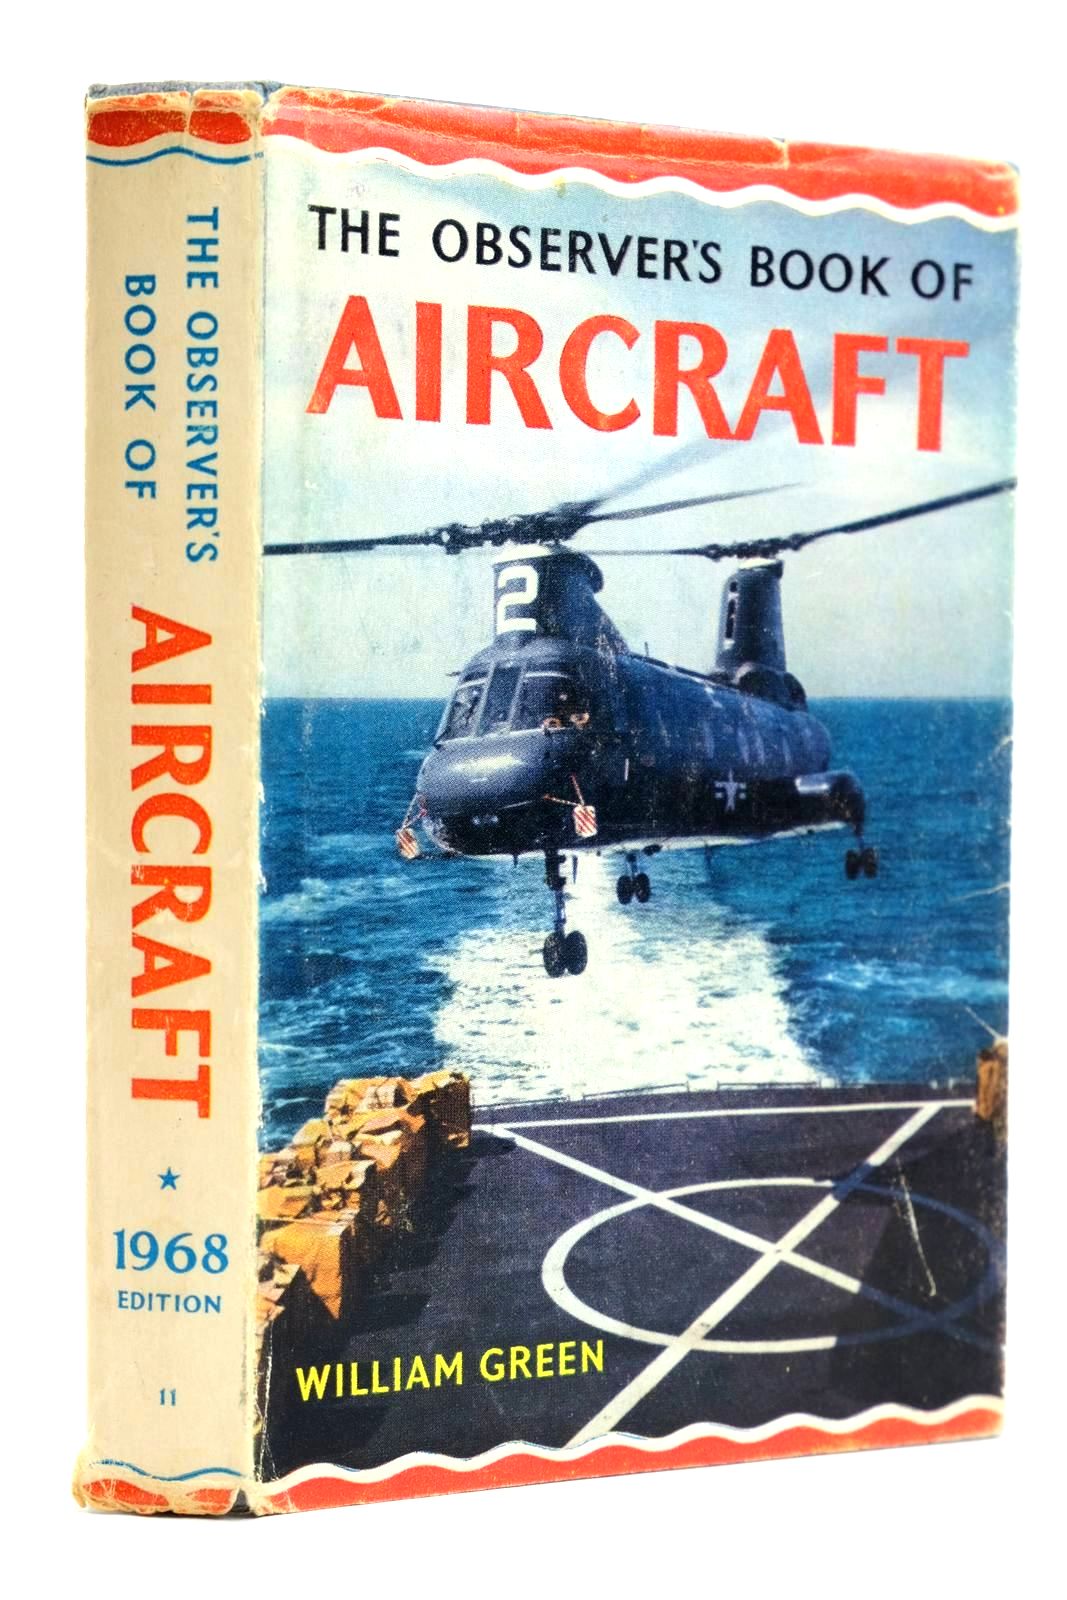 Photo of THE OBSERVER'S BOOK OF AIRCRAFT written by Green, William illustrated by Punnett, Dennis published by Frederick Warne (STOCK CODE: 2132055)  for sale by Stella & Rose's Books